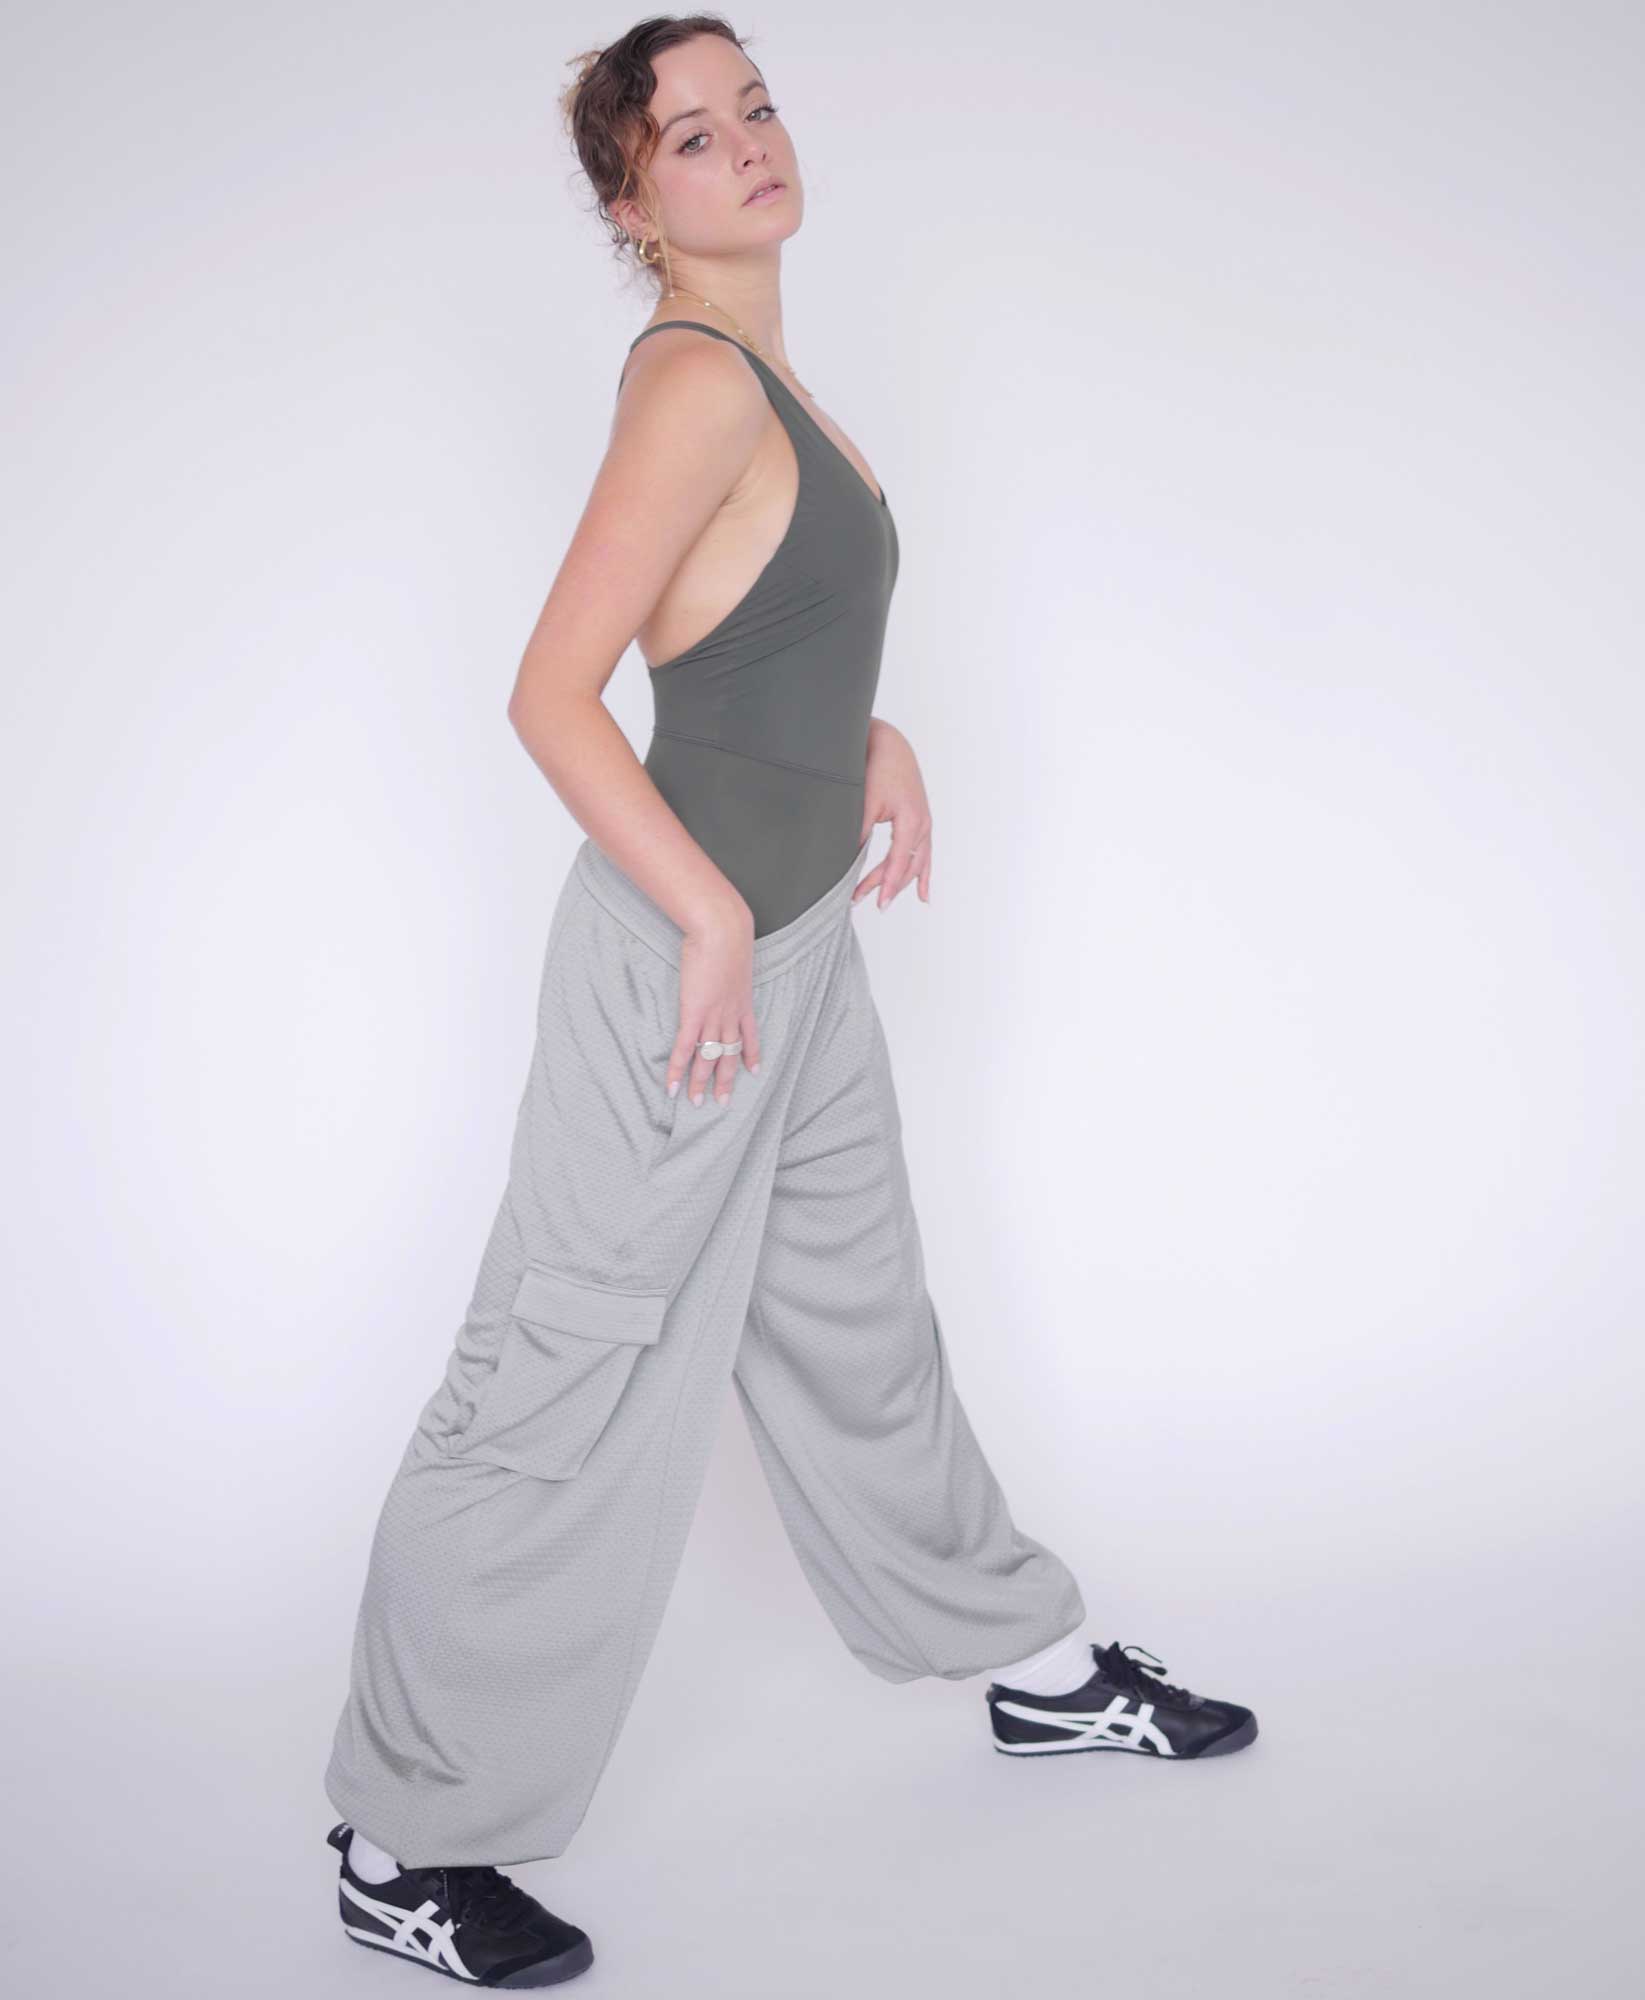 Arena Pant in Mineral Grey with Drawcord at Leg Opening – Wear One's At